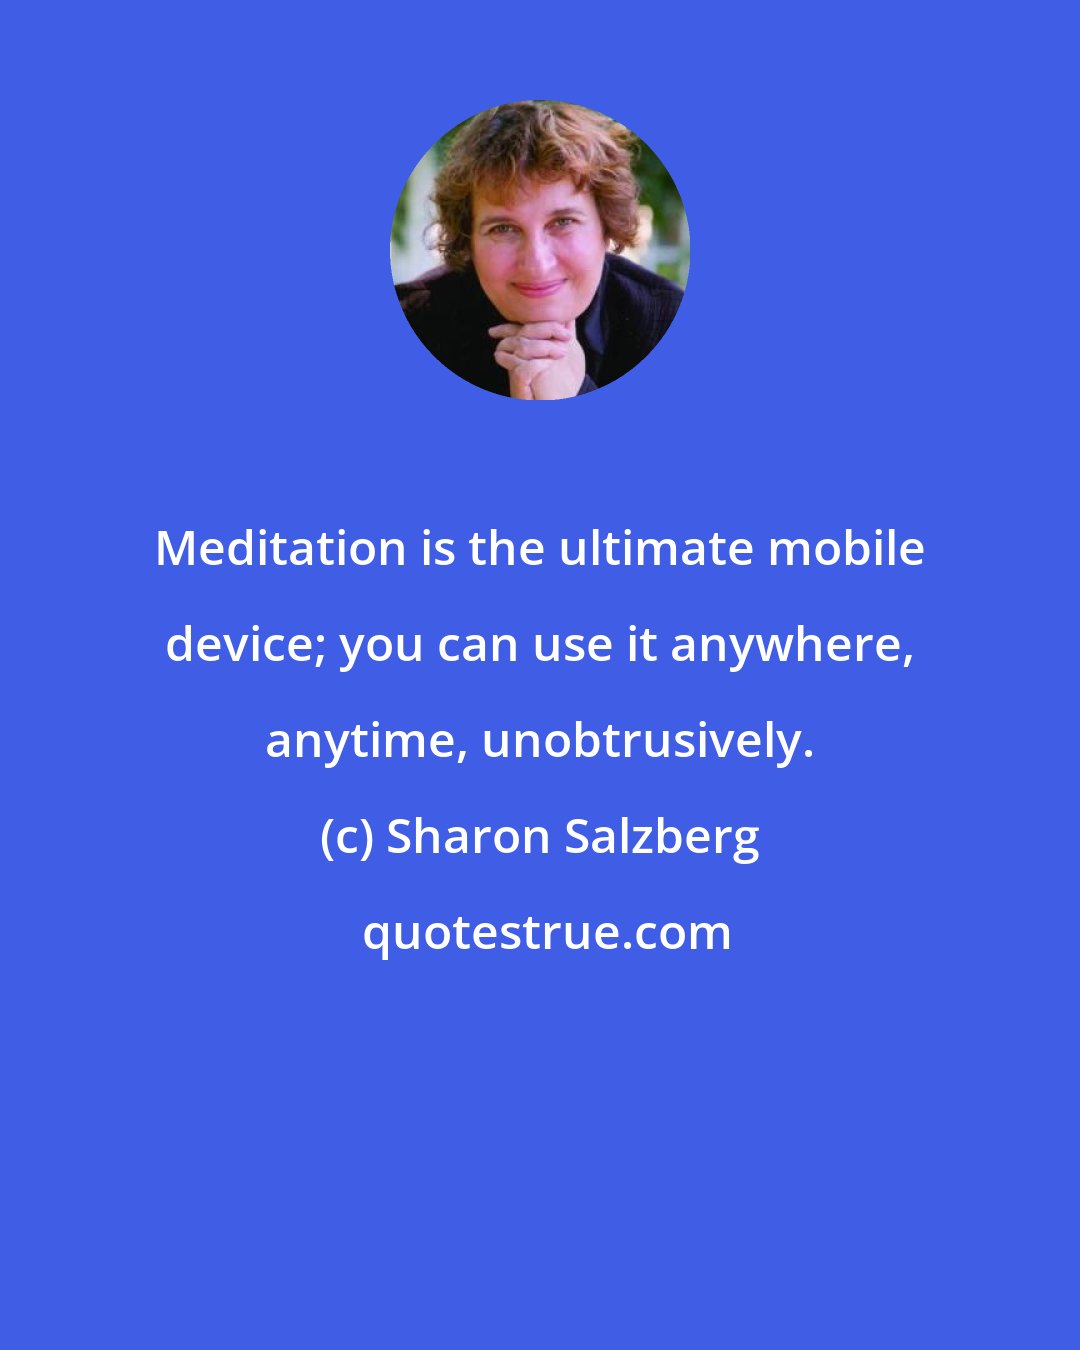 Sharon Salzberg: Meditation is the ultimate mobile device; you can use it anywhere, anytime, unobtrusively.